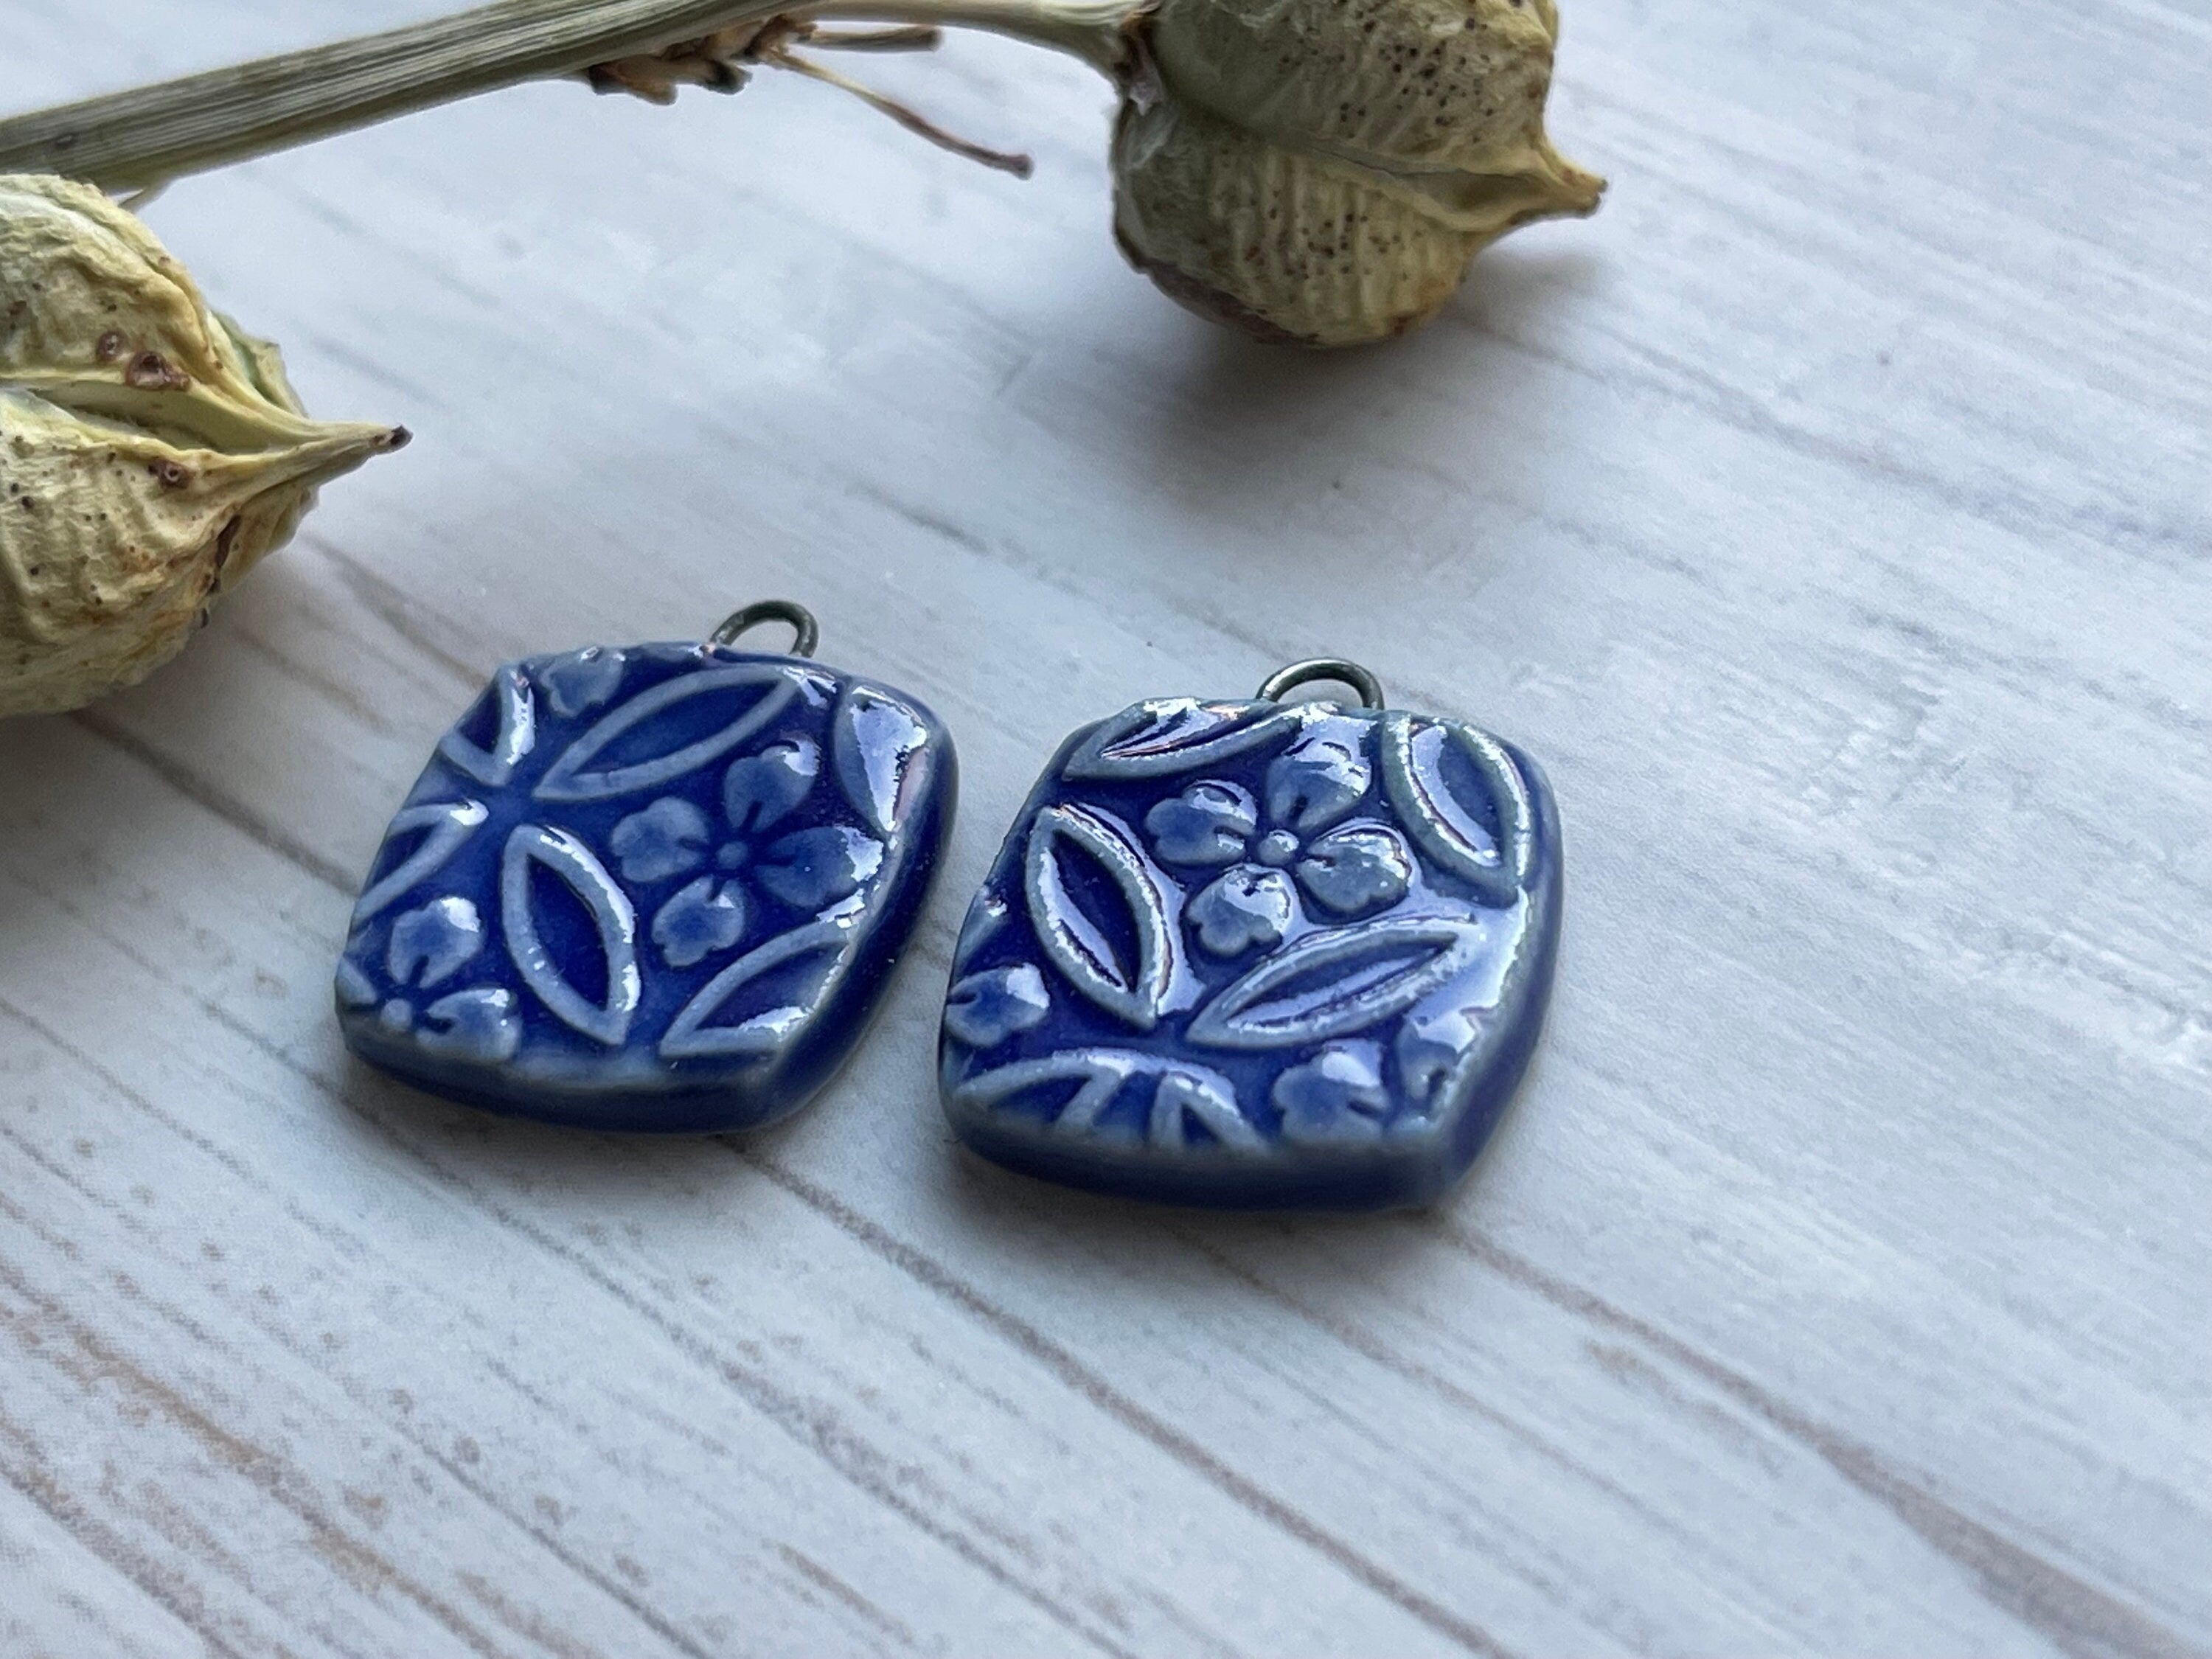 Blue Earring Bead Pair, Floral Pattern, Porcelain Ceramic Charms, Jewelry Making Components, Beading Handmade